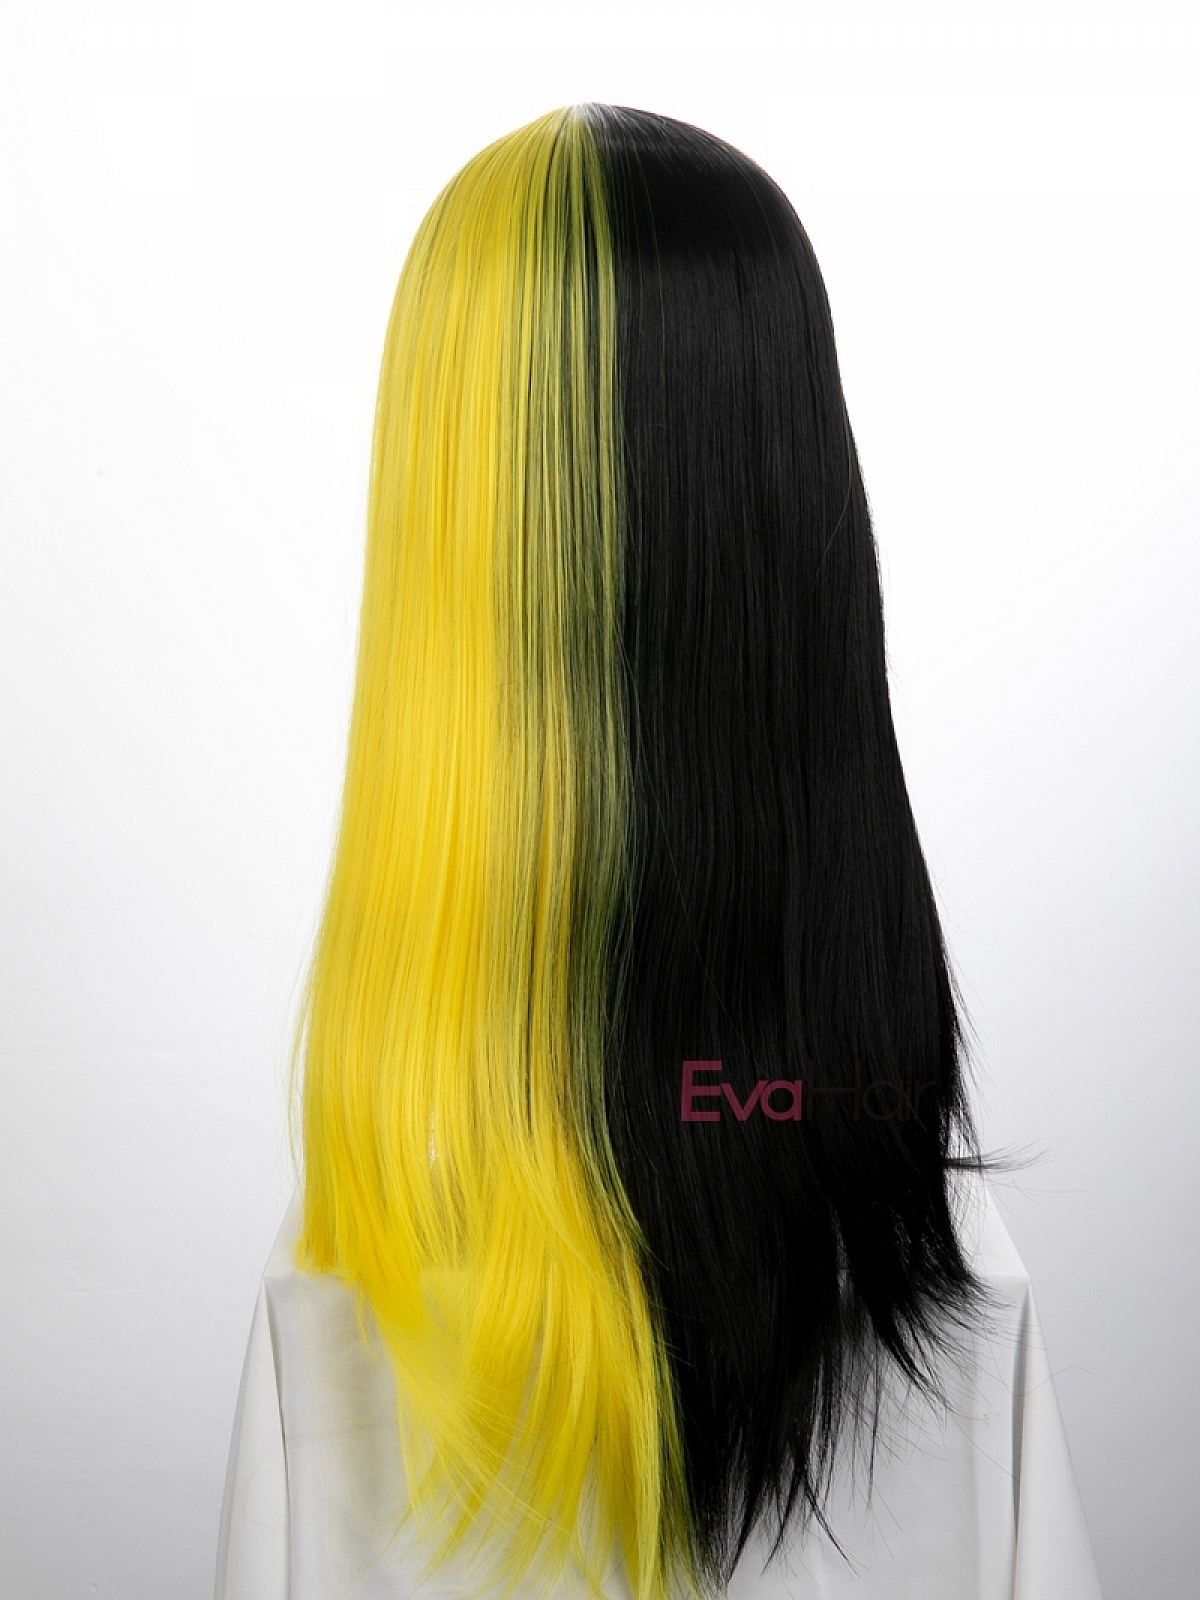 Evahair Half Black and Half Yellow Wefted Cap Long Staight Synthetic Wig  with Bangs - Home - EvaHair